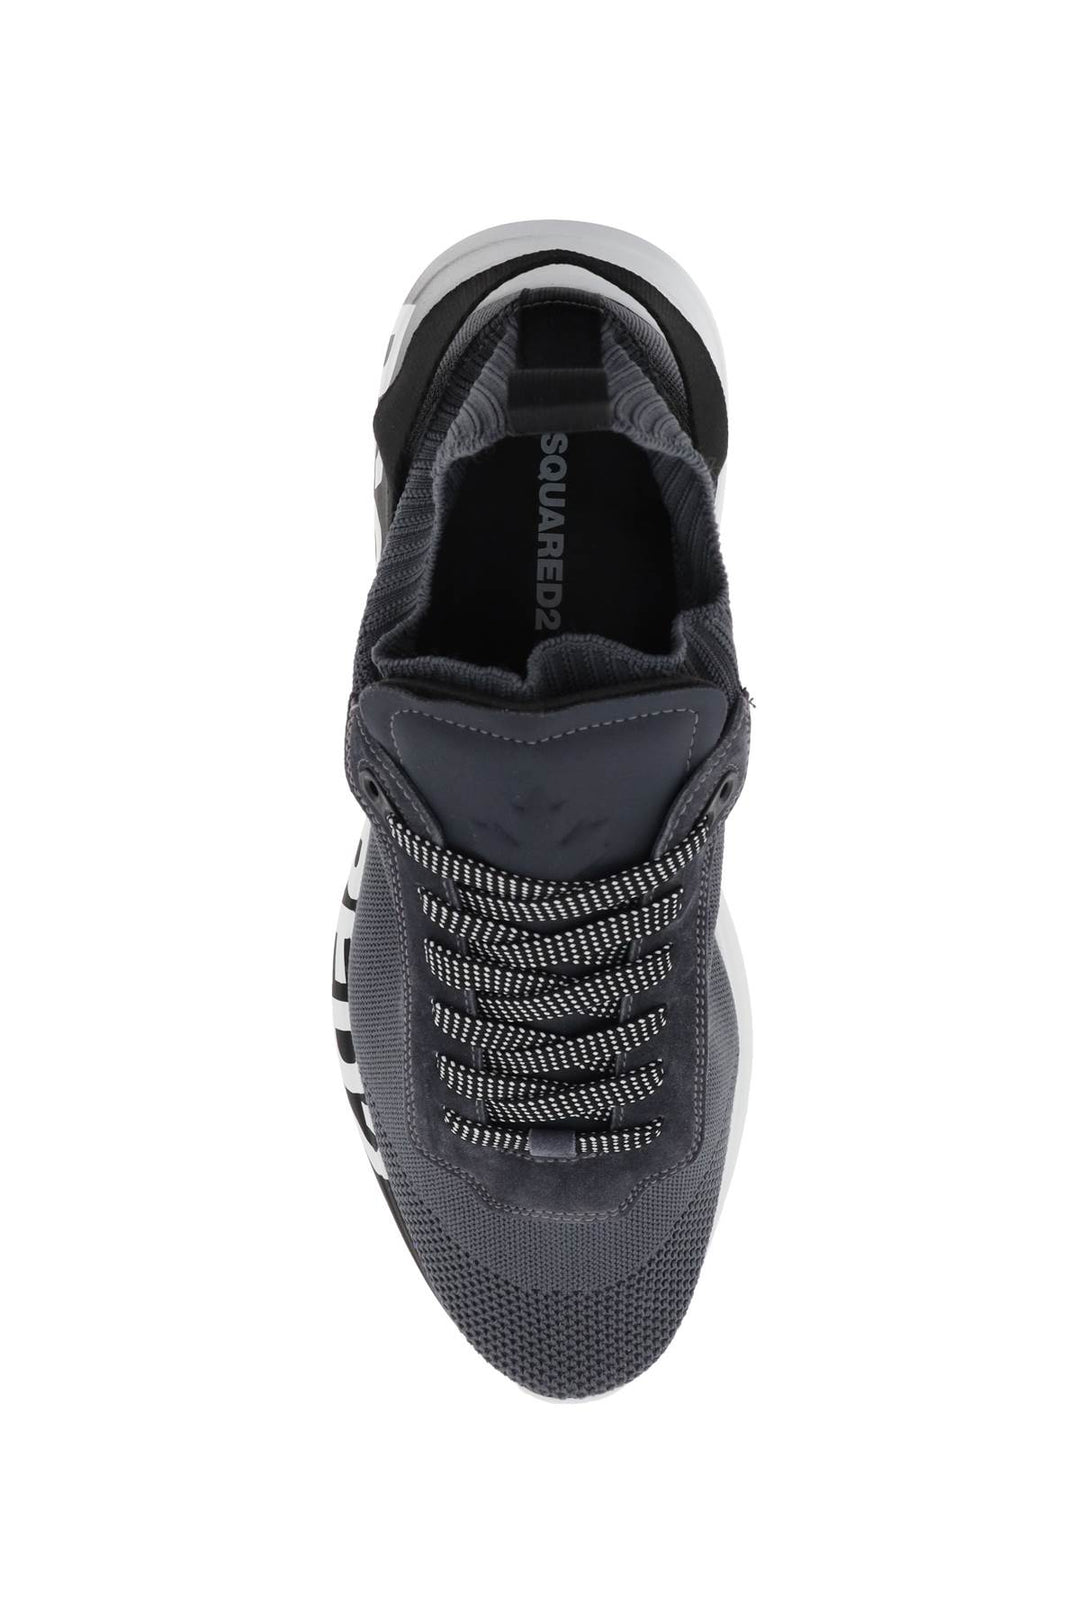 Dsquared2 Fly Sneakers   Grey